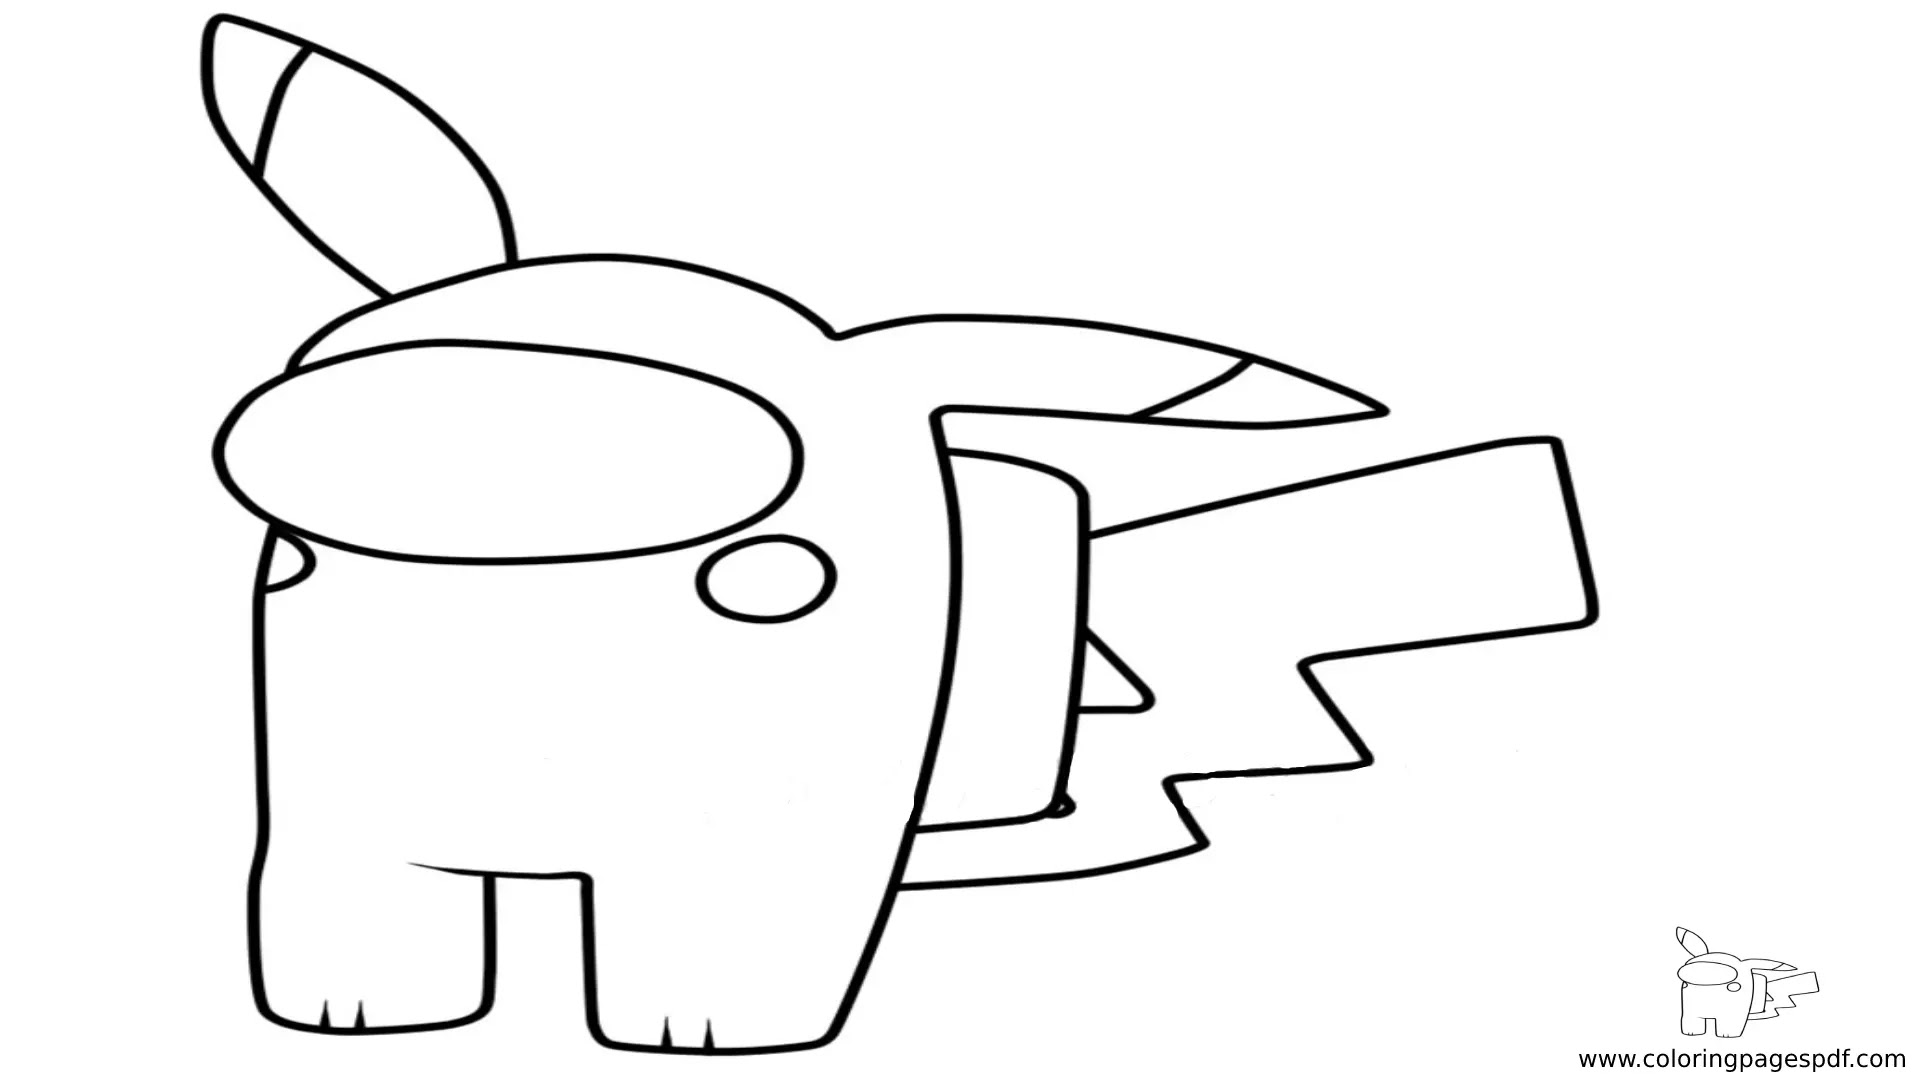 coloring page of among us pikachu design